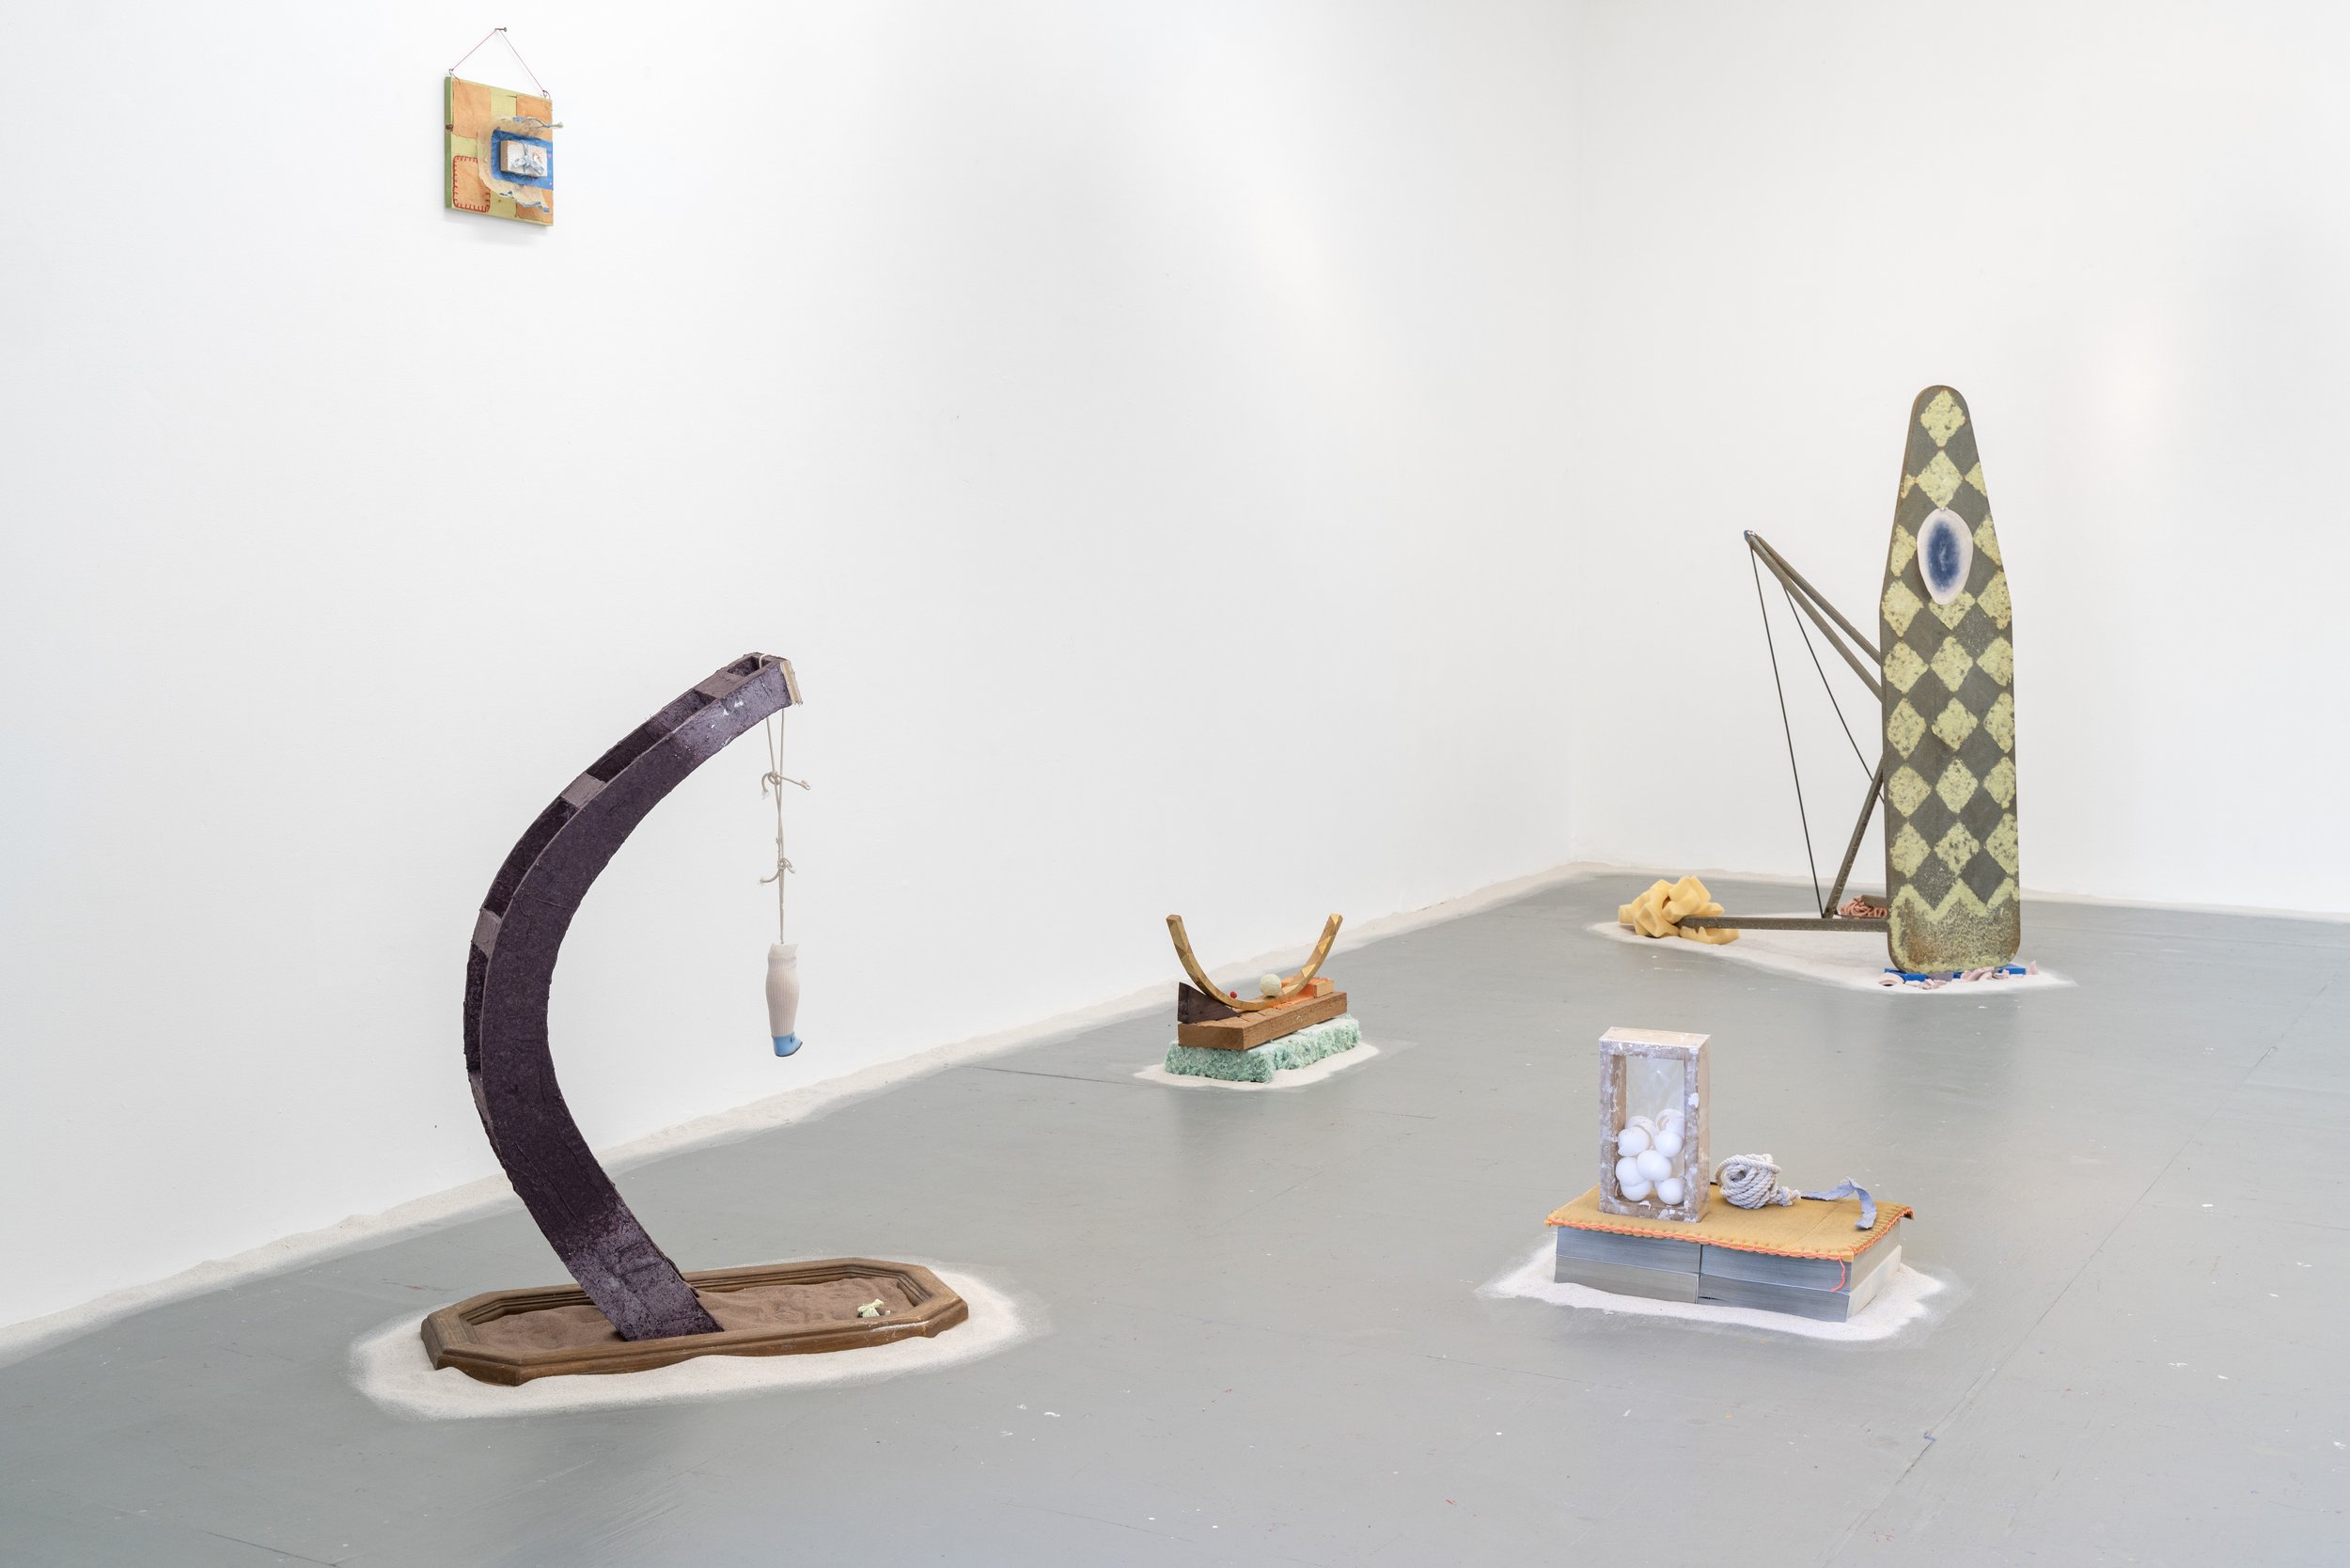 Odds and Ends (installation view)